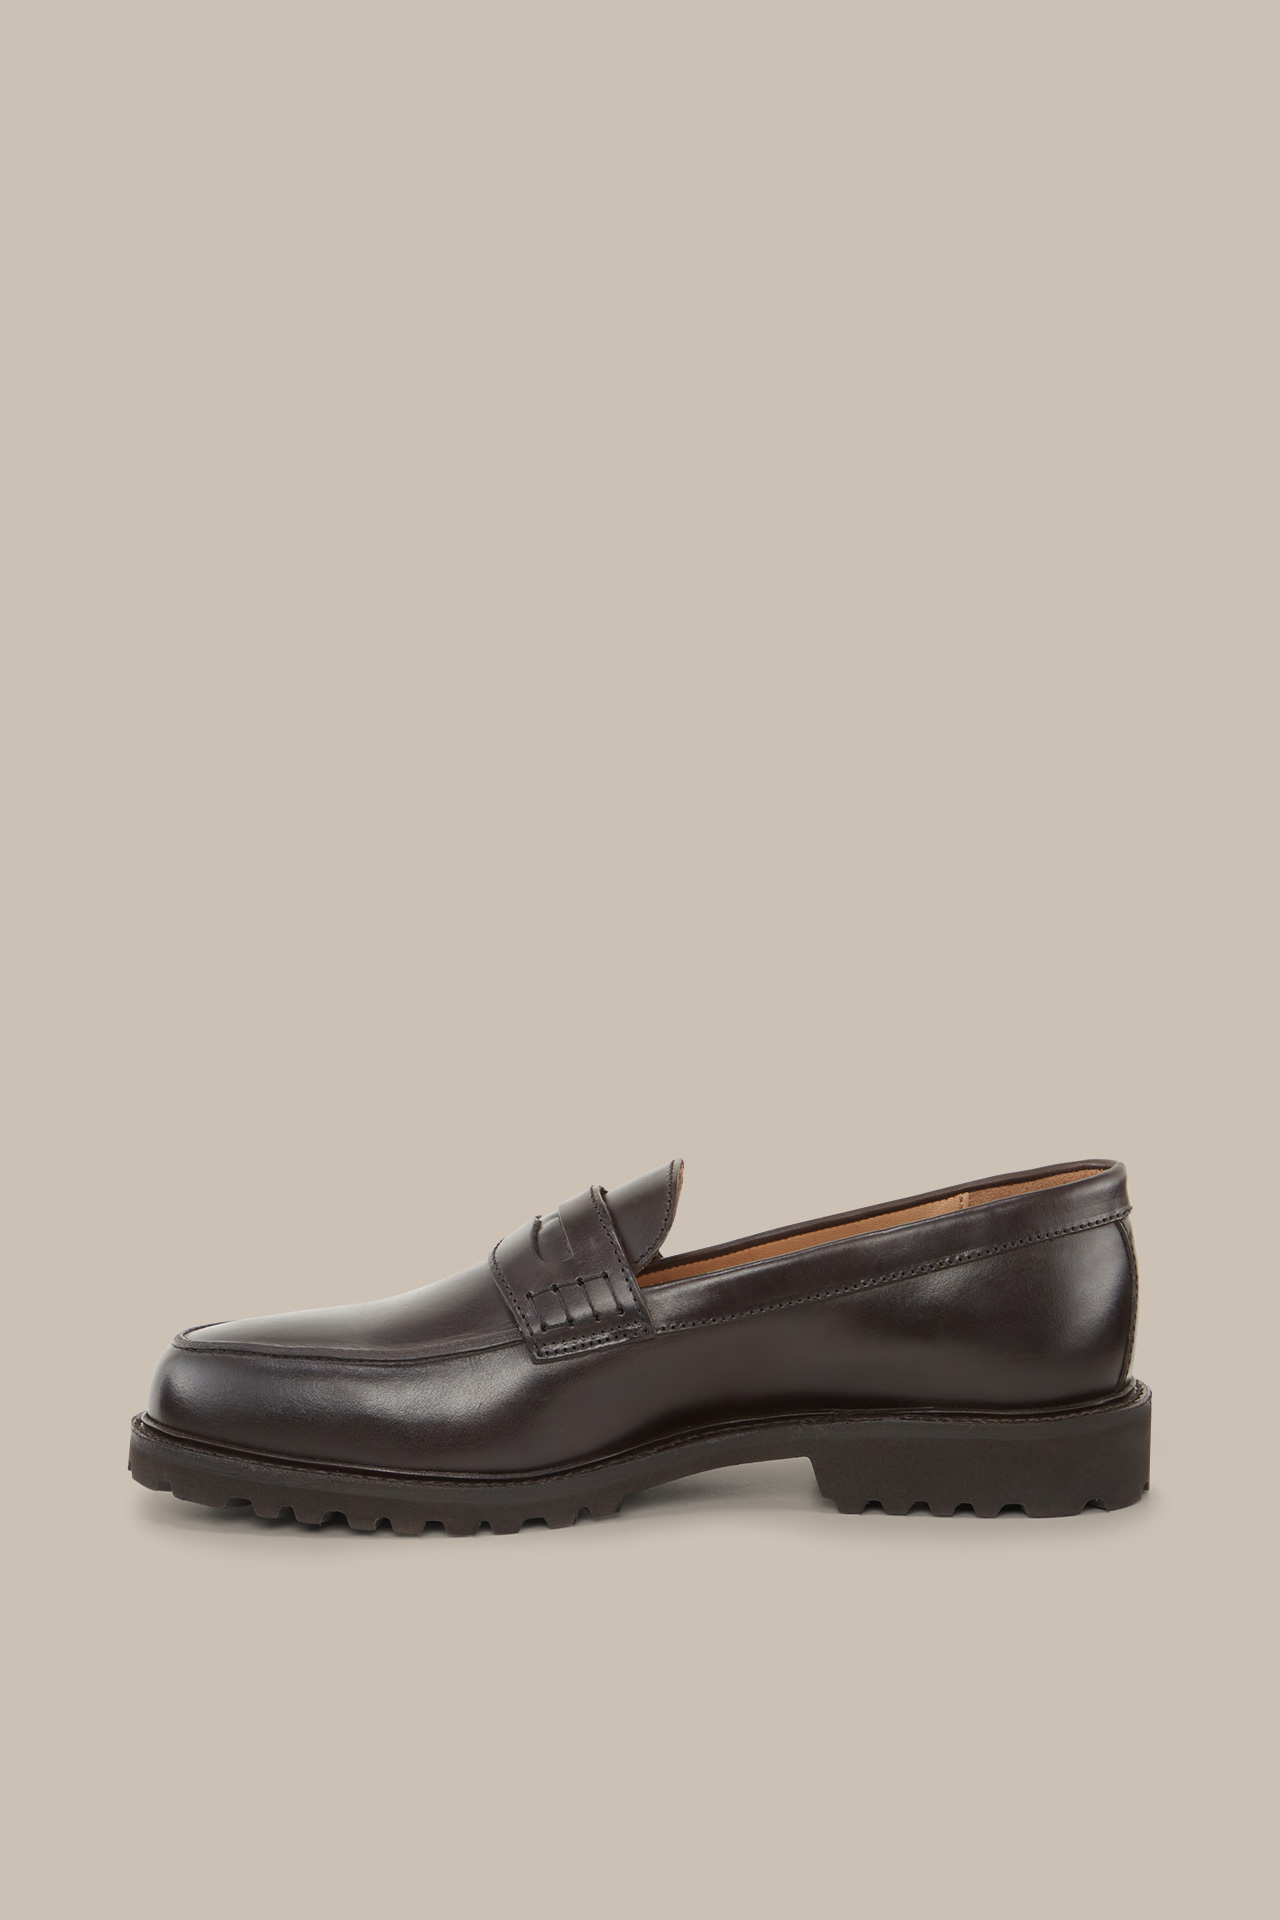 Loafers by Ludwig Reiter in Brown